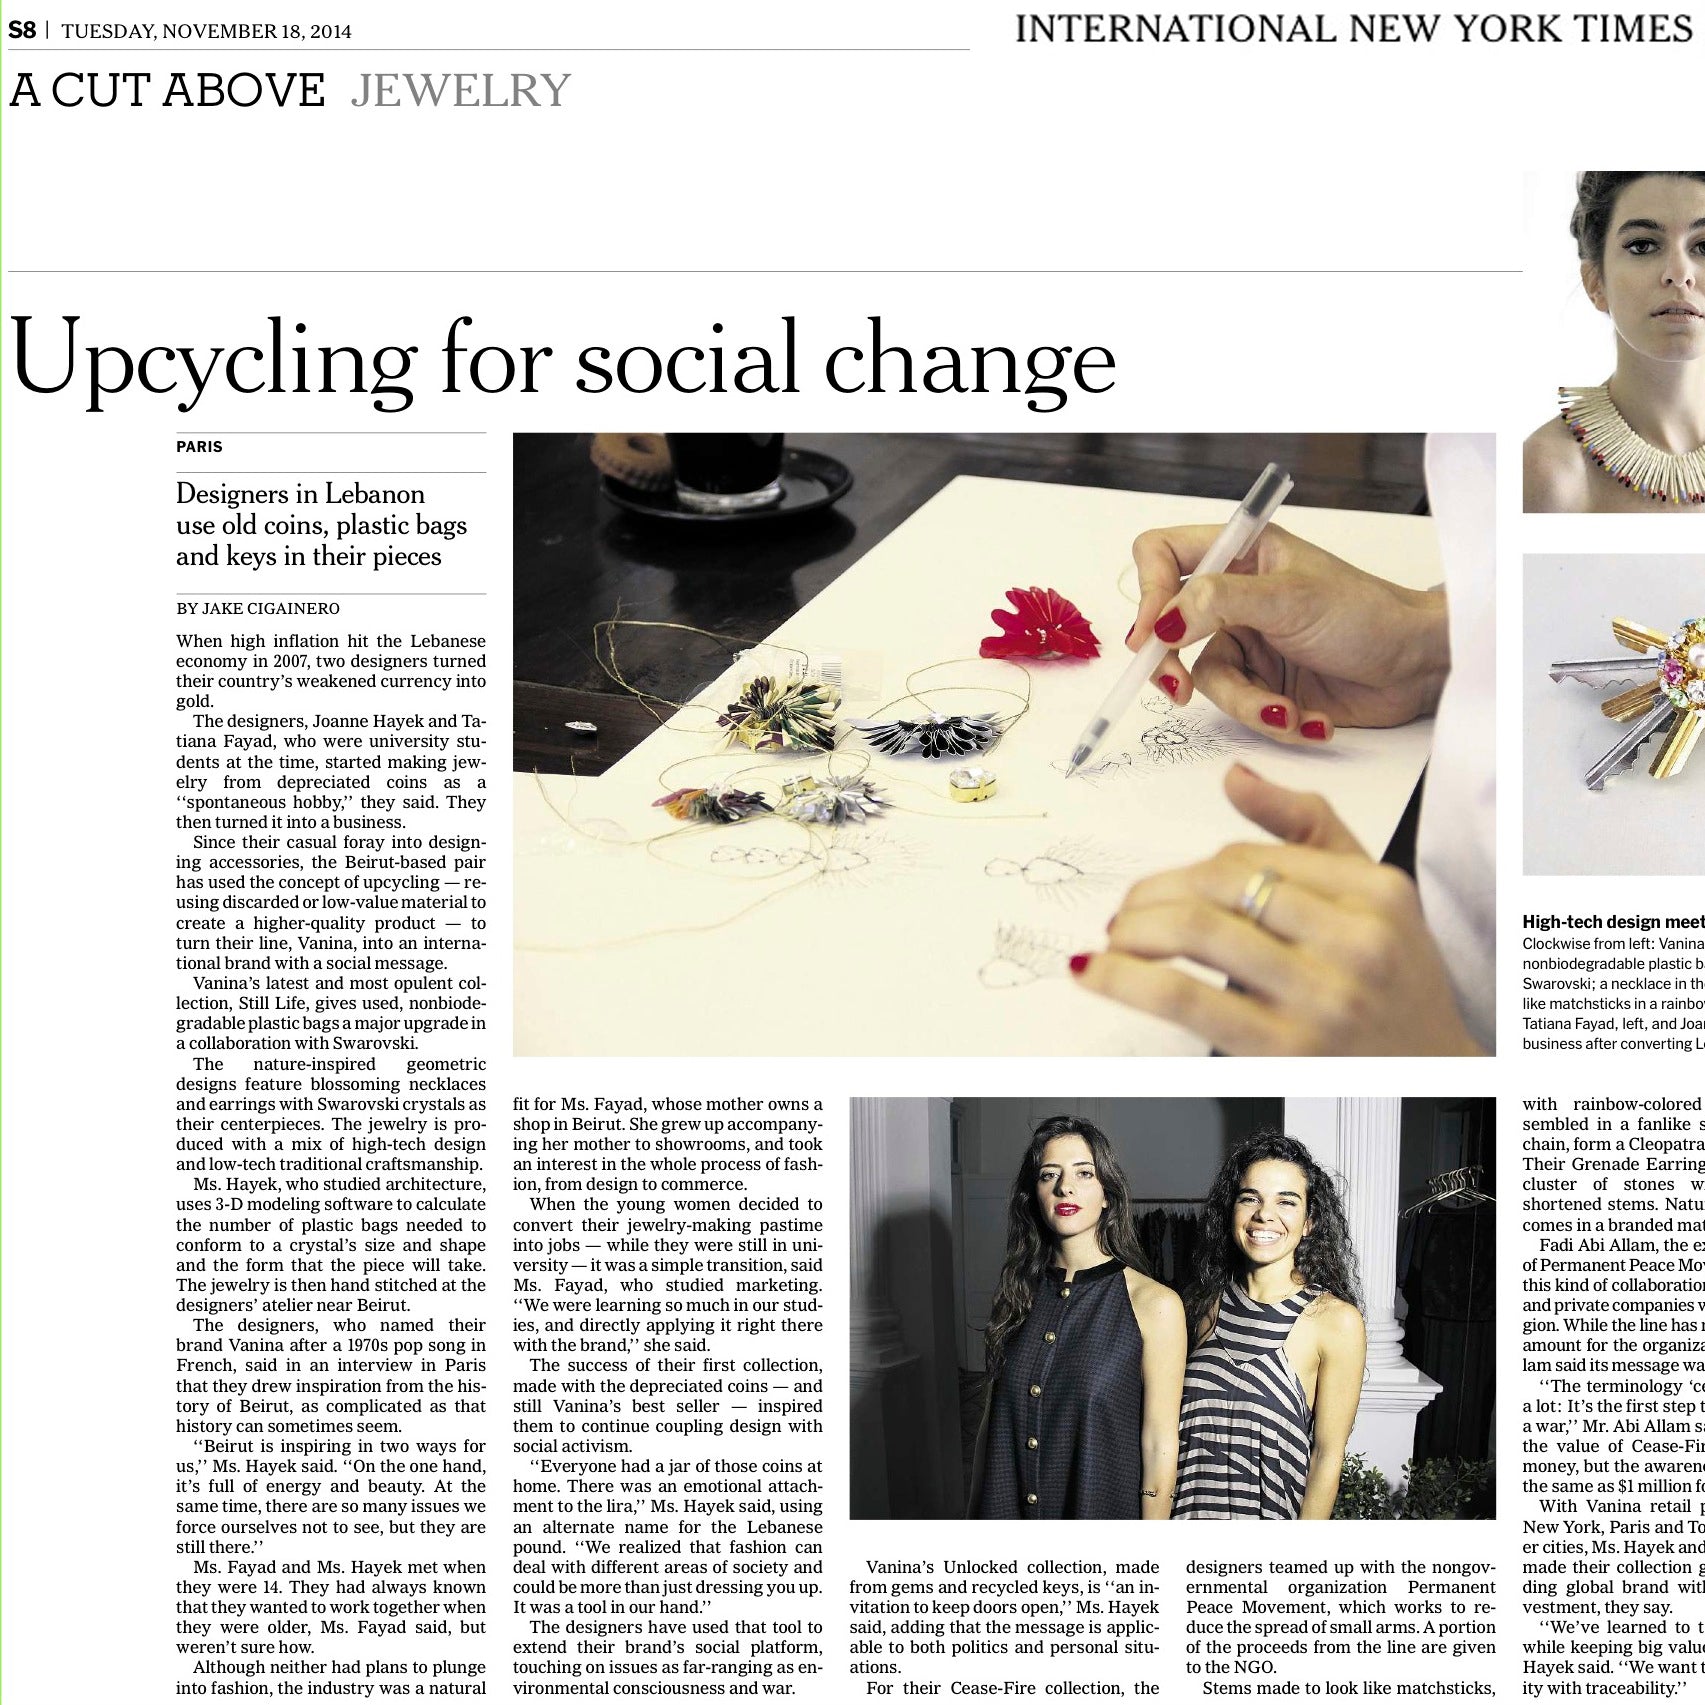 vanina in the new york times ethical fashion